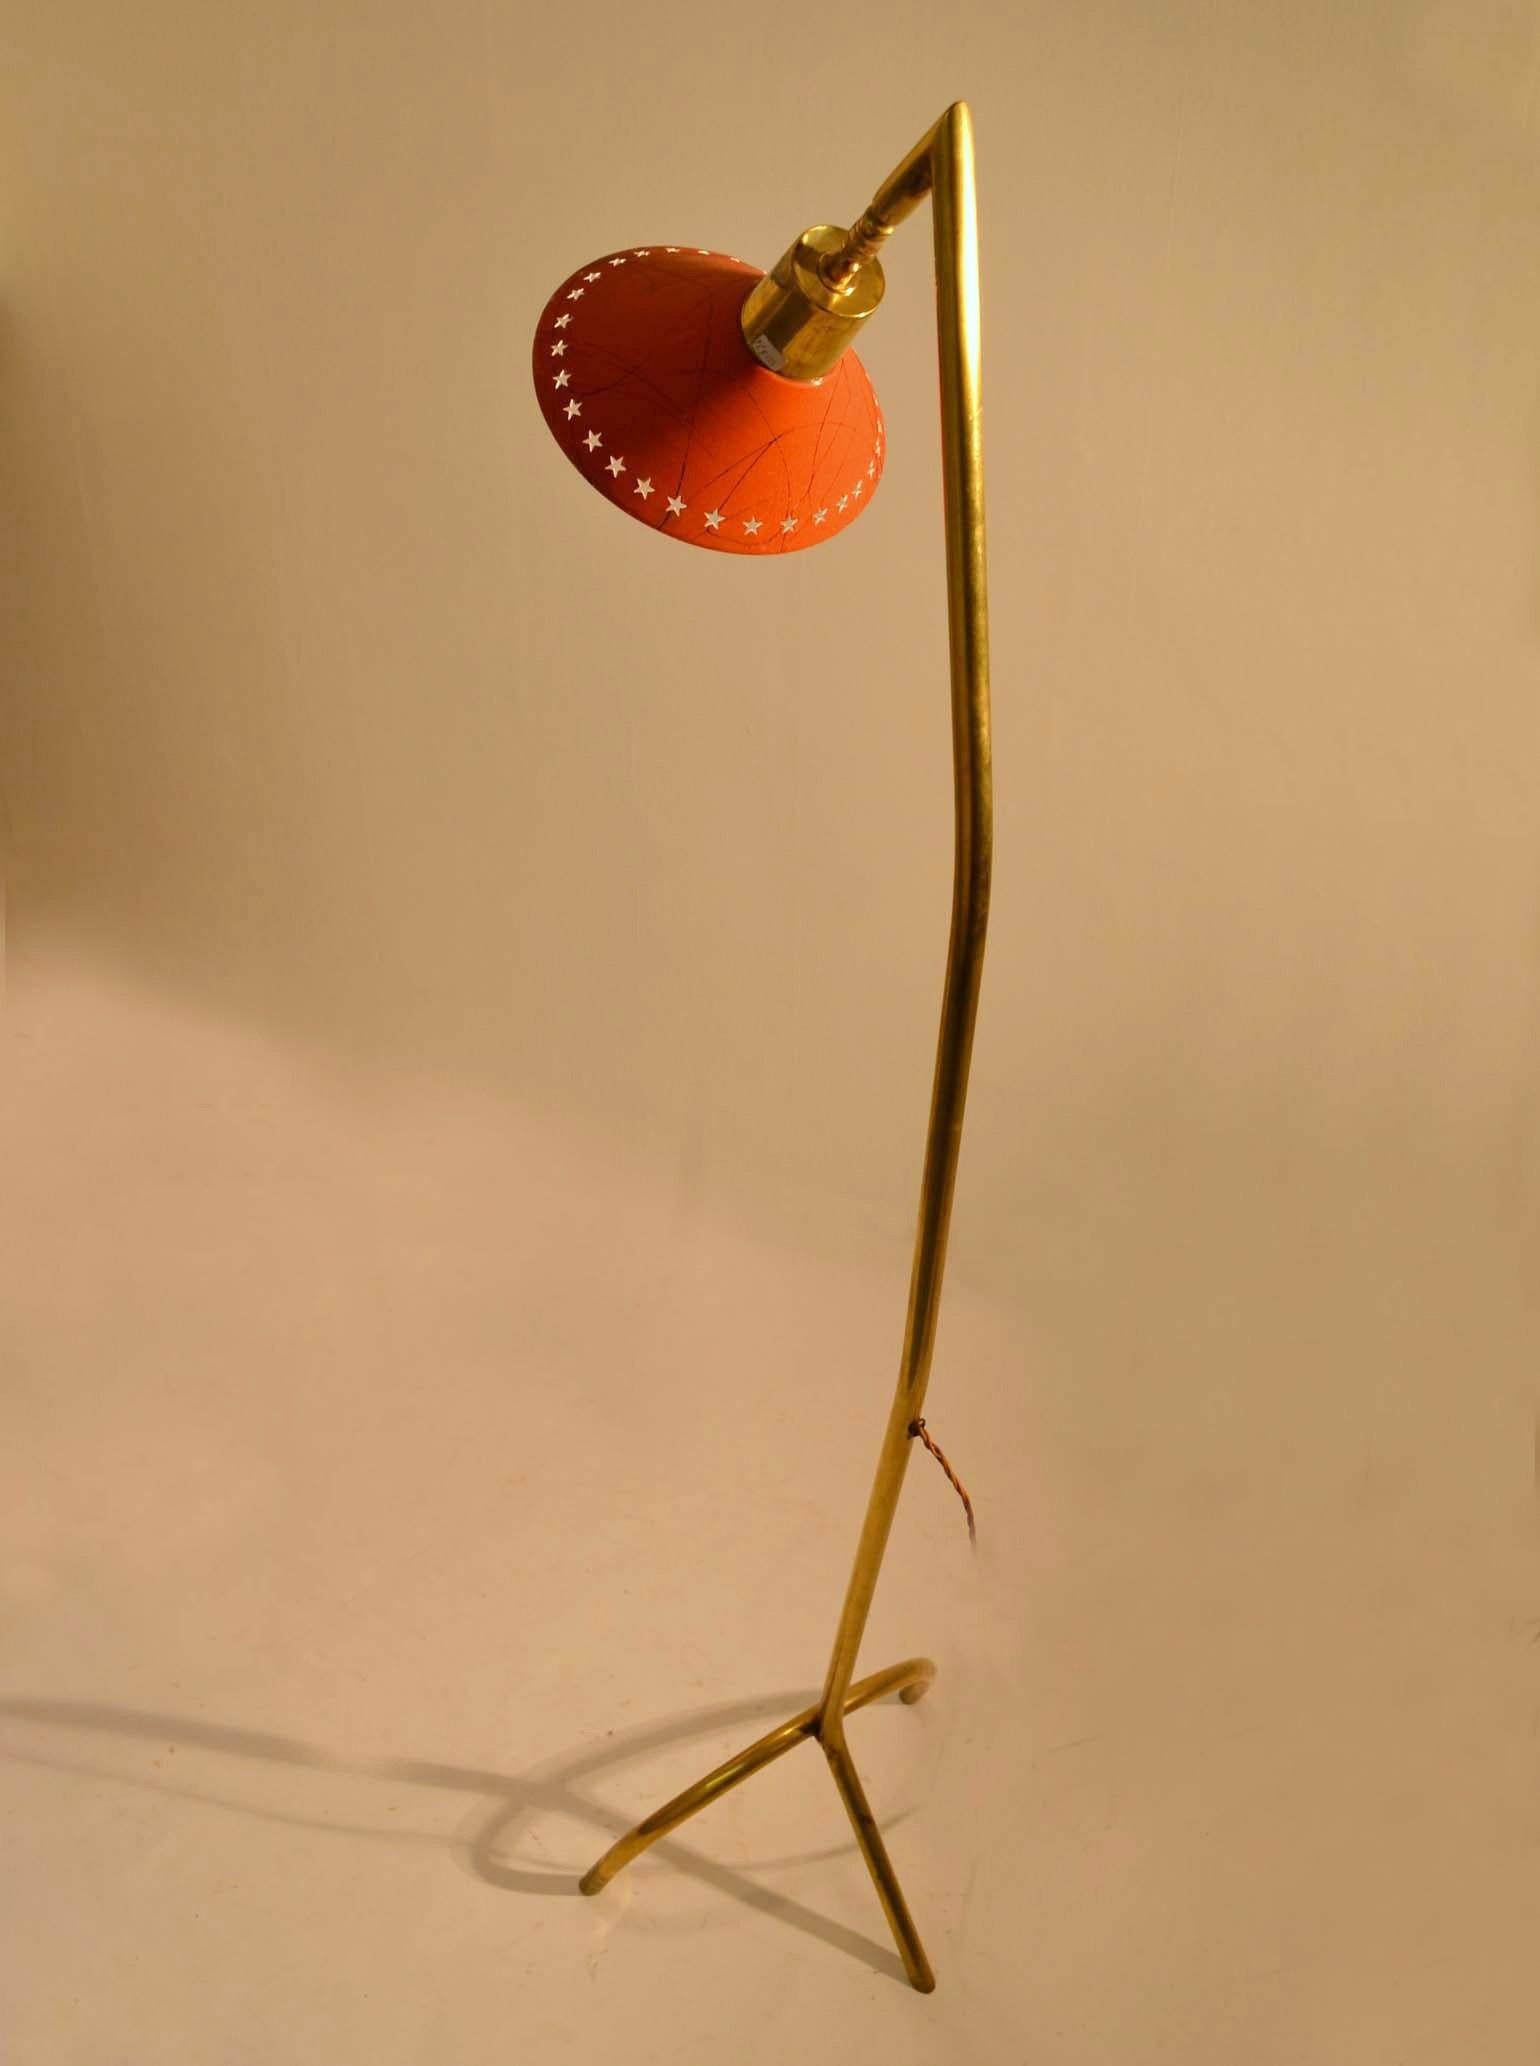 Mid-Century Modern brass floor lamp on tripod leg with adjustable orange enameled shade is perfect for reading with directed light. The legs are weighted inside the tubes for extra balance.
The shade has an array of perforated stars and a swirl line